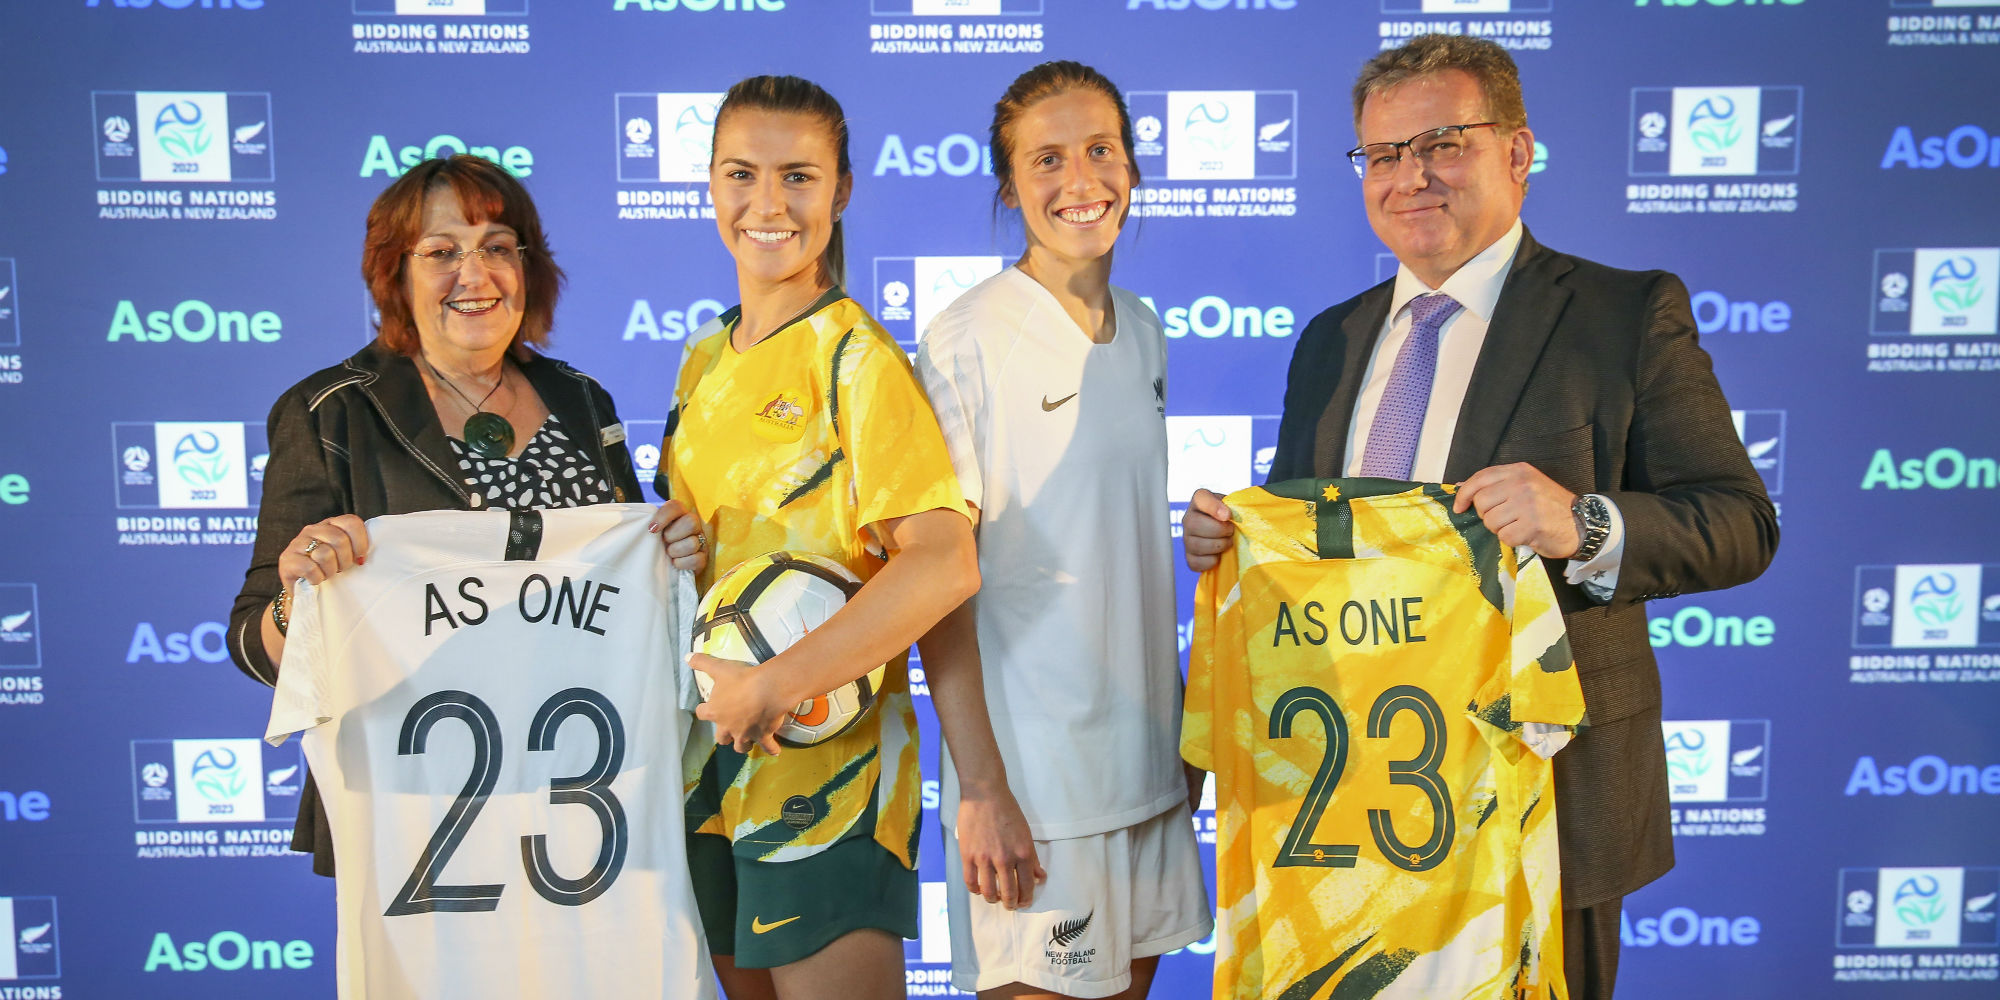 Johanna Wood, New Zealand Football President and Chris Nikou, FFA chairman with Australia and New Zealand players Stephanie Catley and Rebekah Stott during the announcement of Australia & New Zealand's Joint Bid to host the FIFA Women's 2023 World Cup